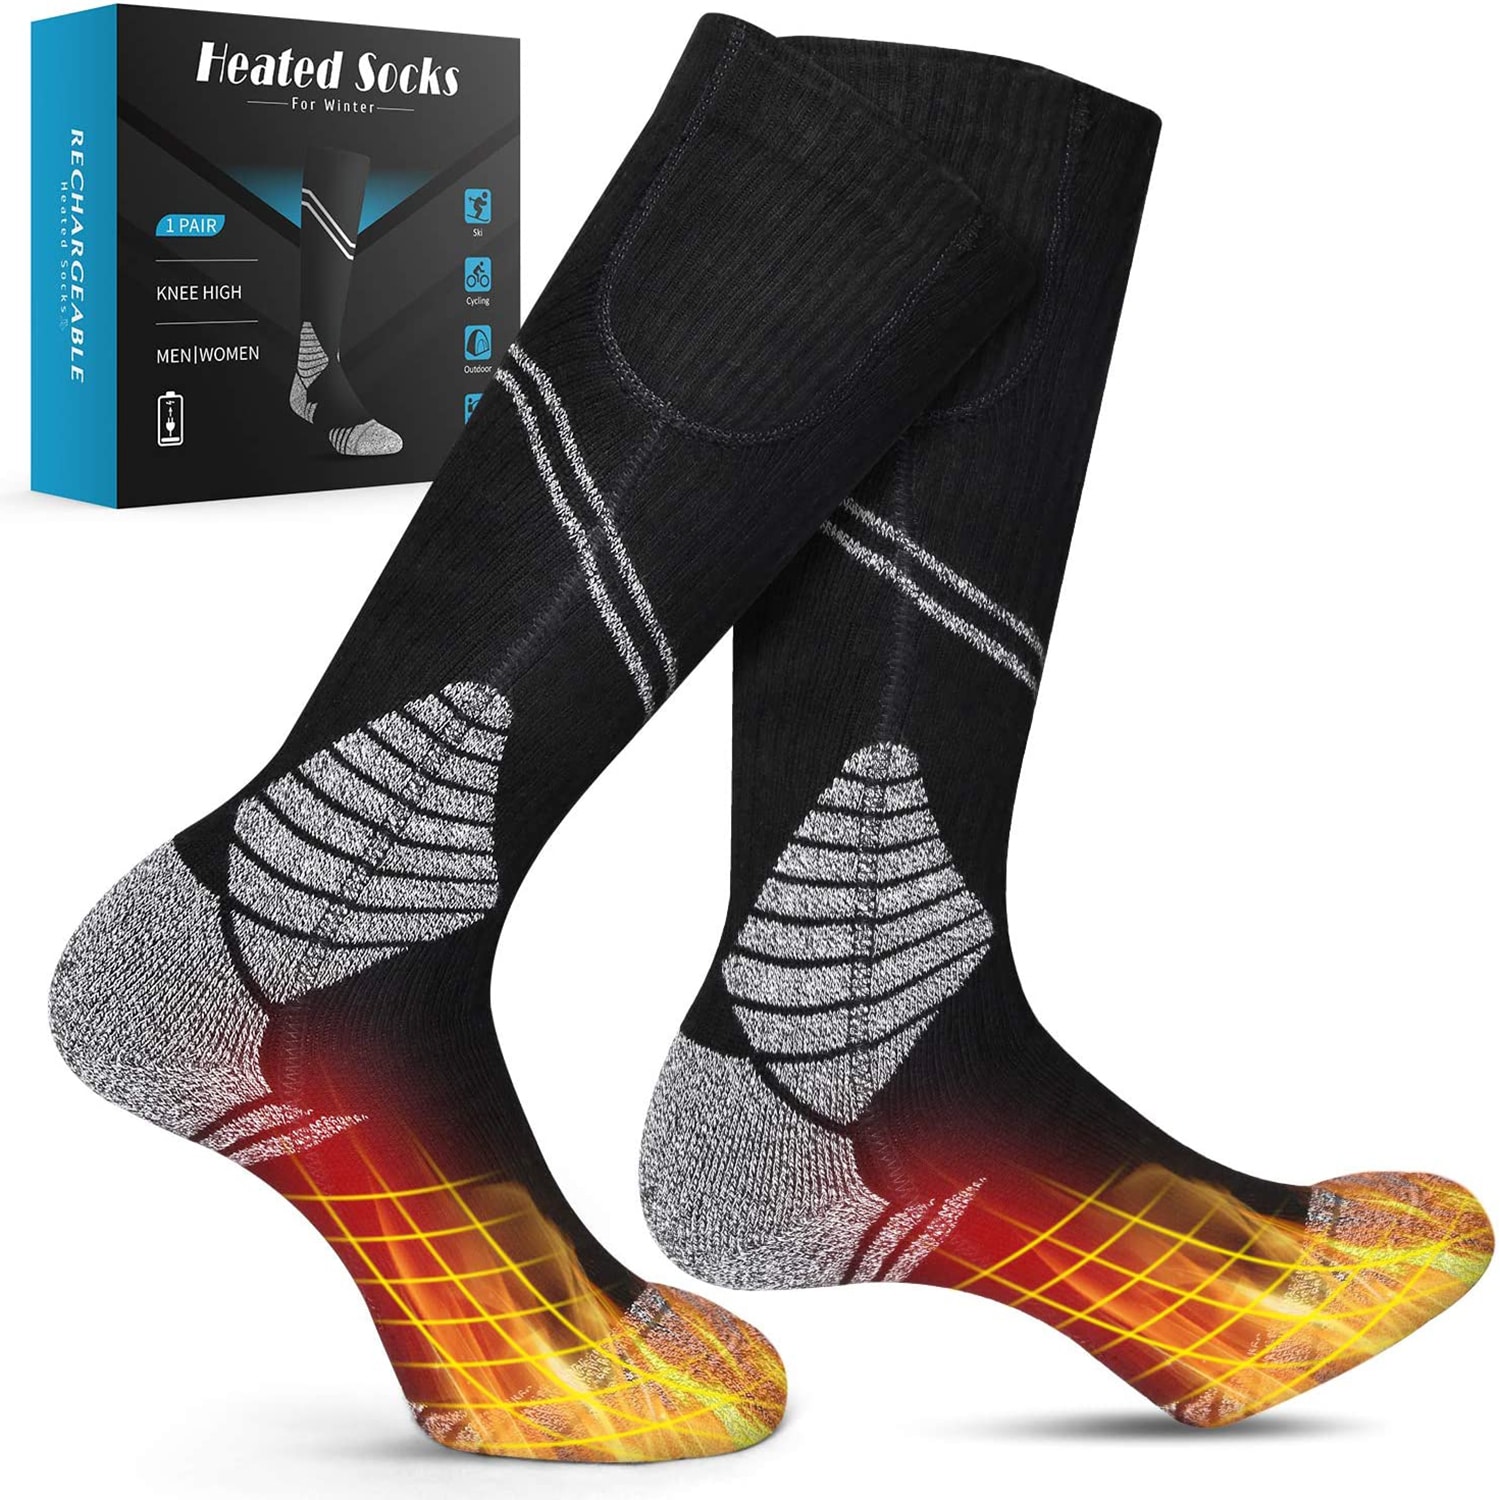 Best Rechargeable Heated Socks for Men And Women in 2022